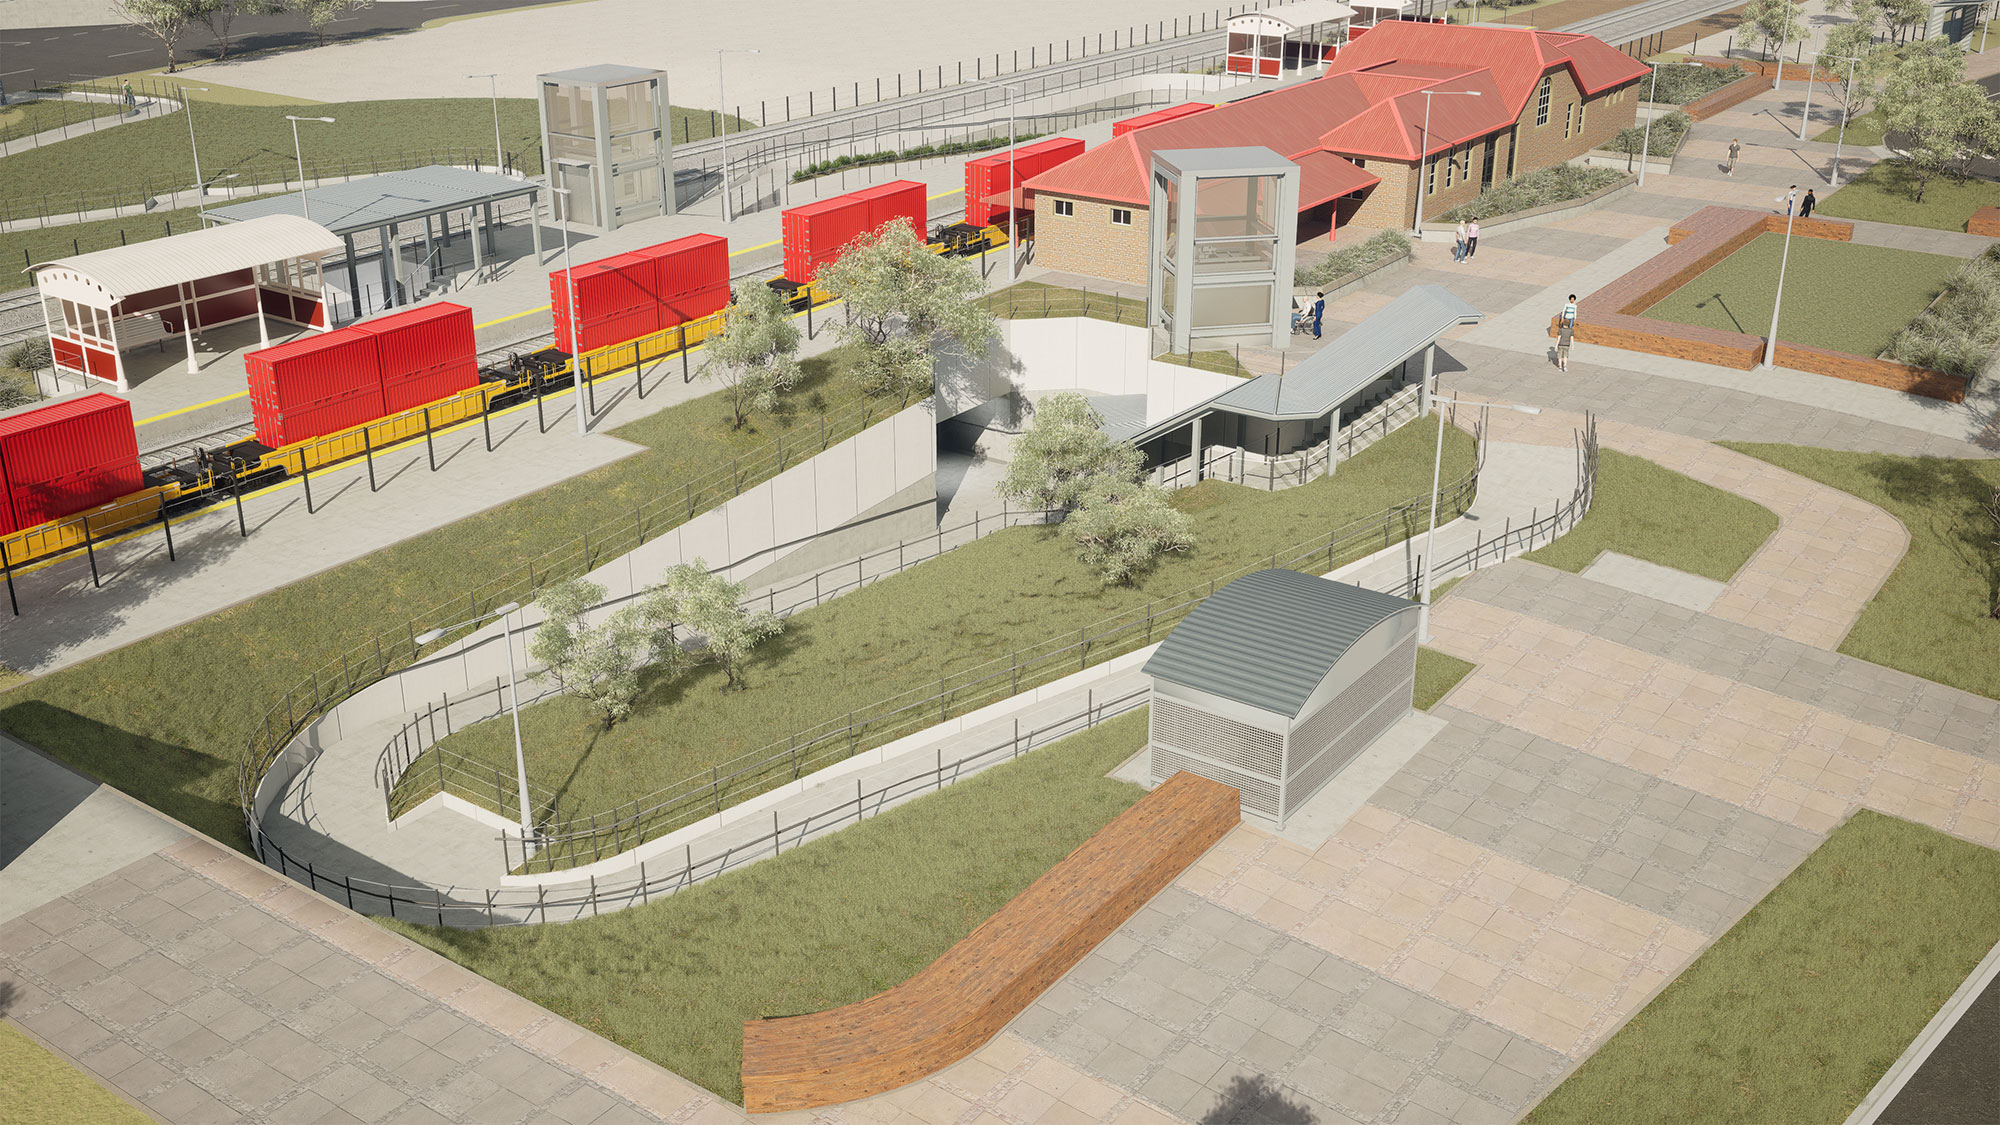 Visualisation of the new pedestrian underpass and forecourt at Benalla Station.